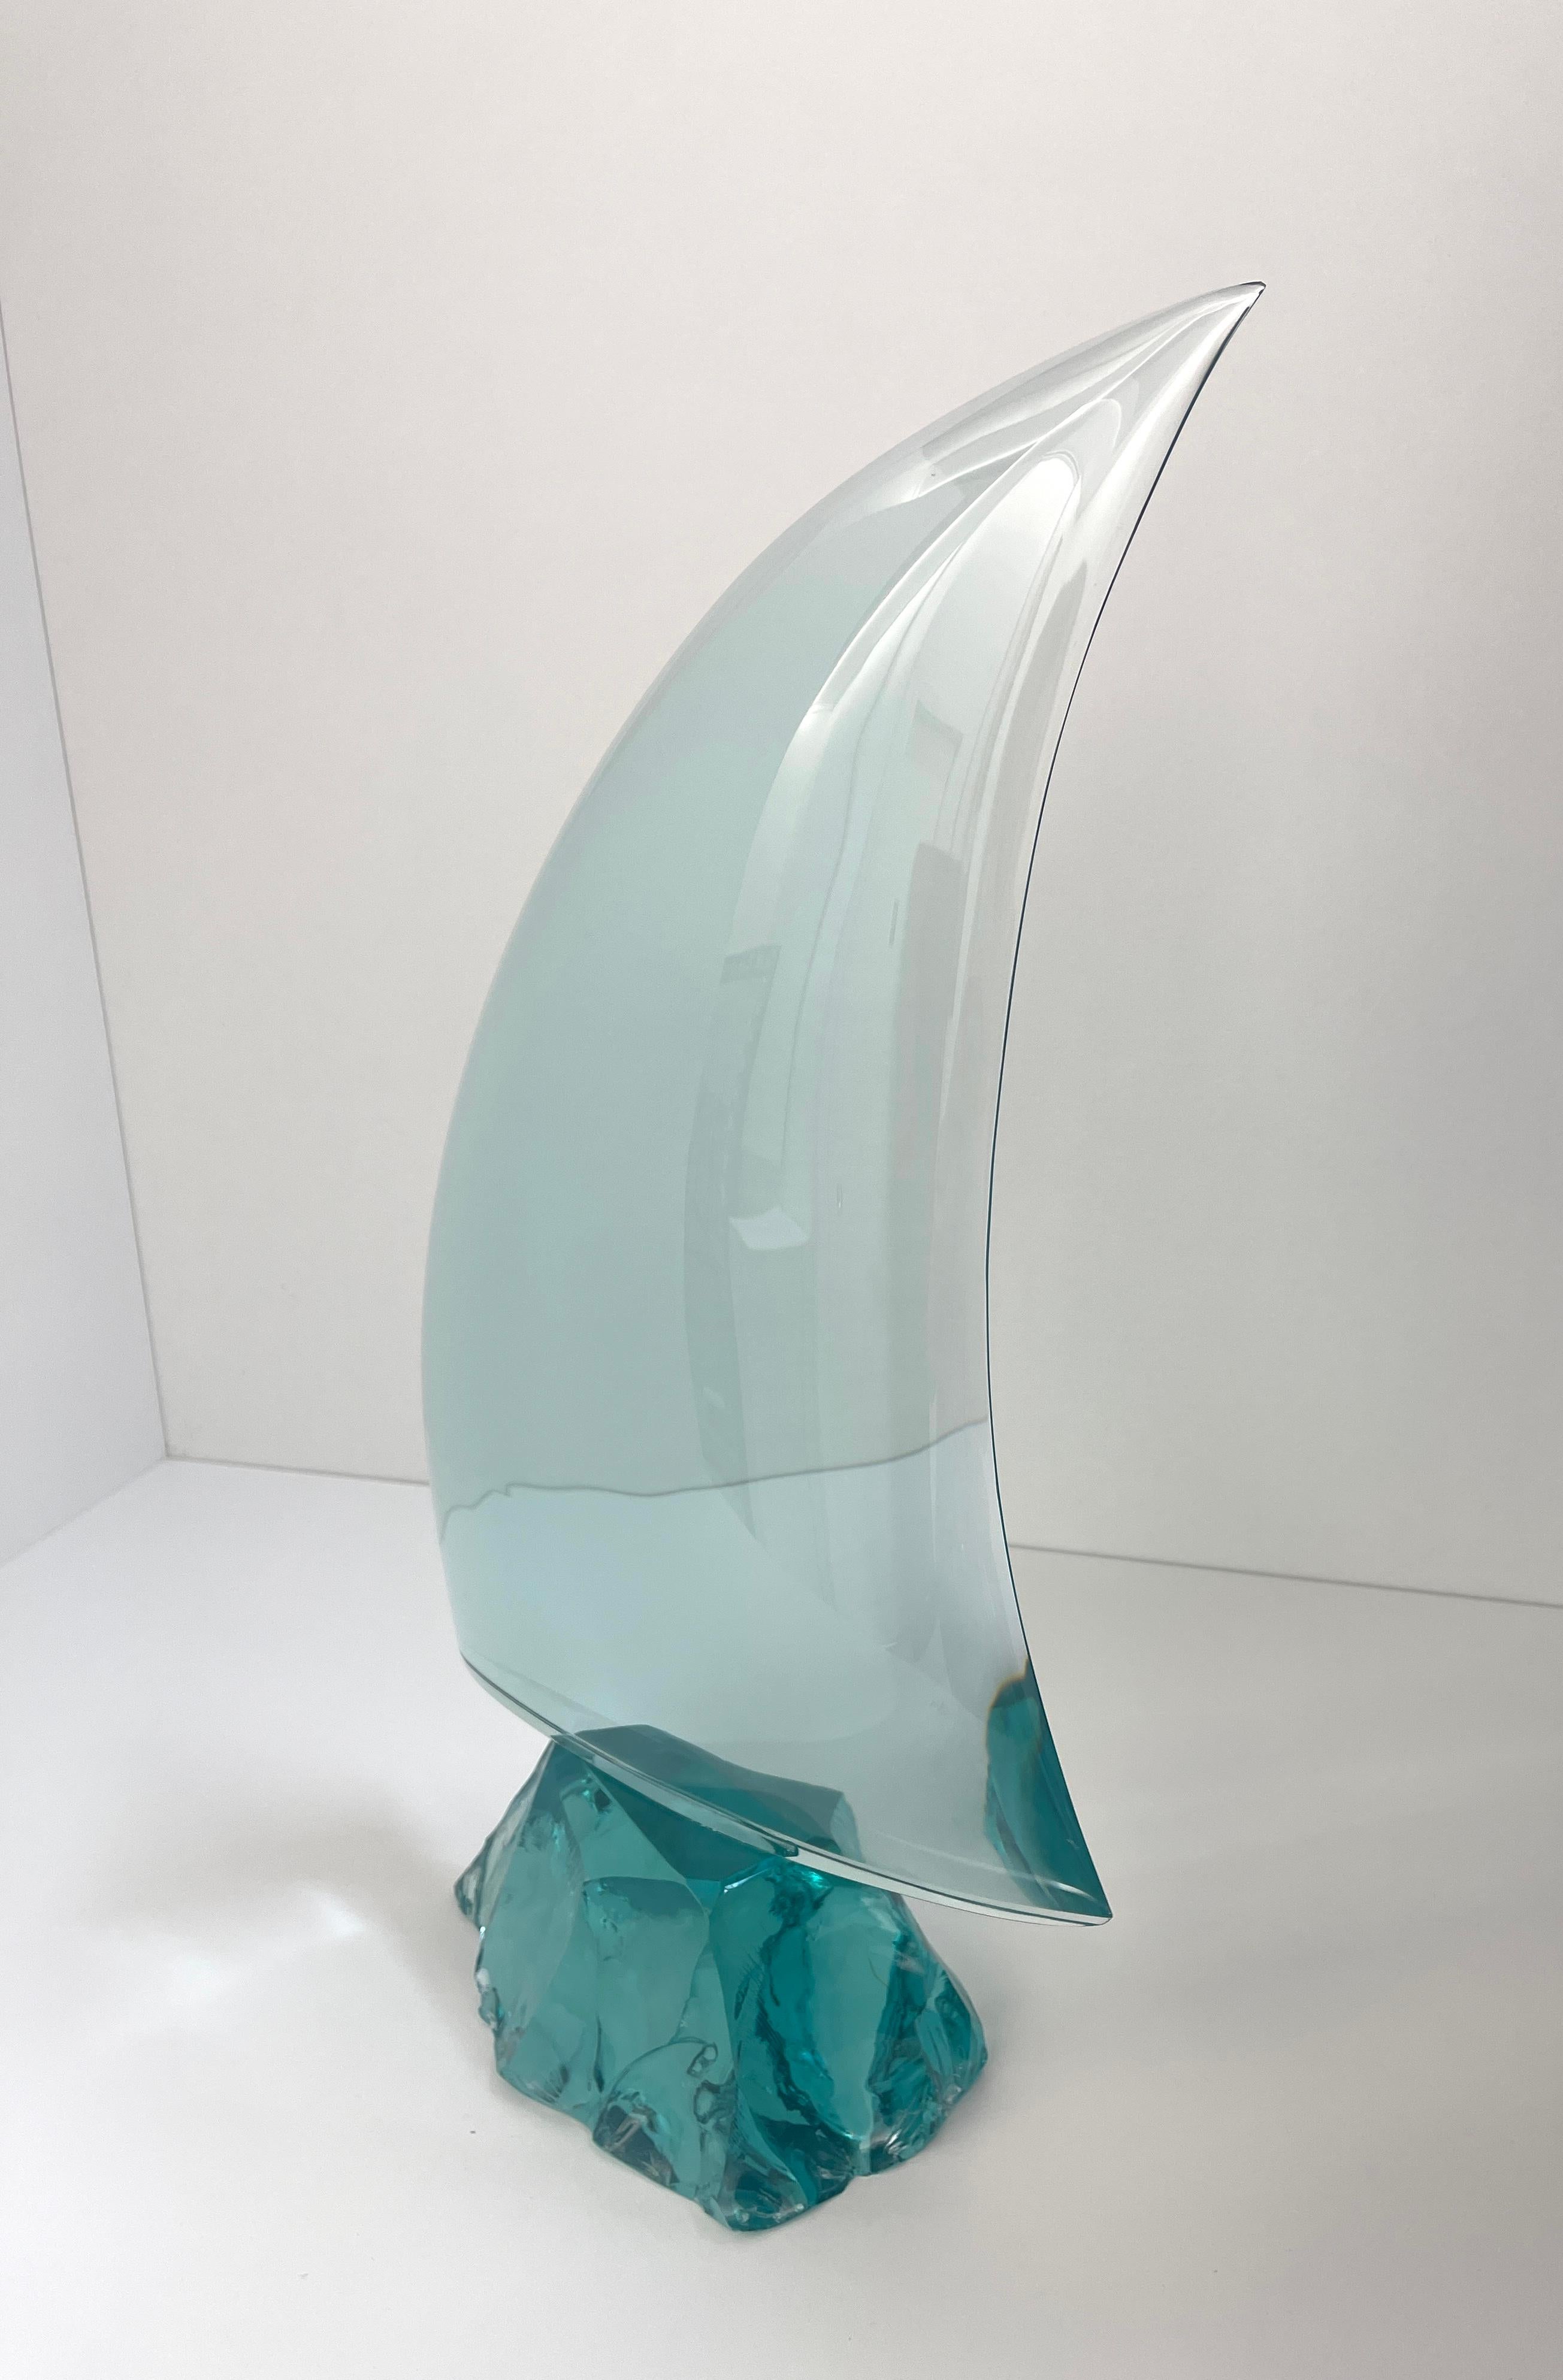 Contemporary 'Sail' Handmade Aquamarine Crystal Big Sculpture by Ghirò Studio In New Condition For Sale In Pieve Emanuele, Milano